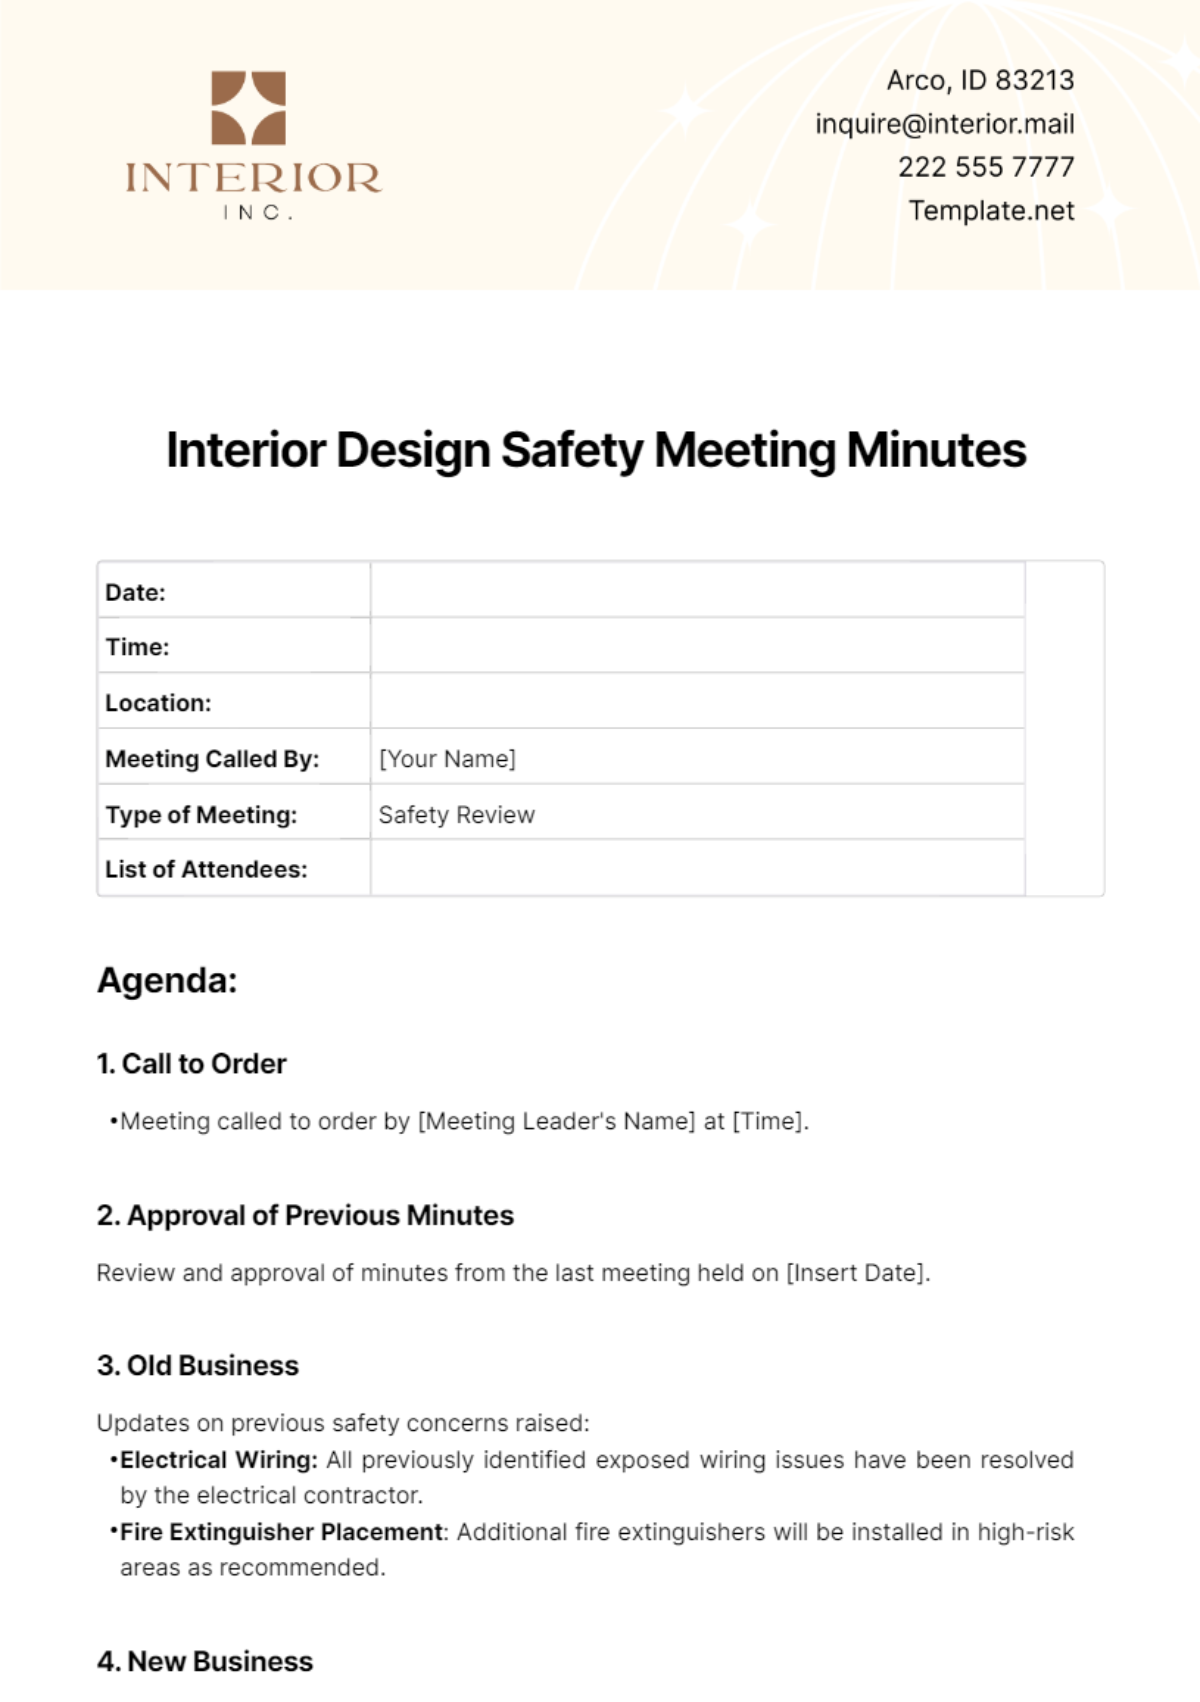 Free Interior Design Safety Meeting Minutes Template